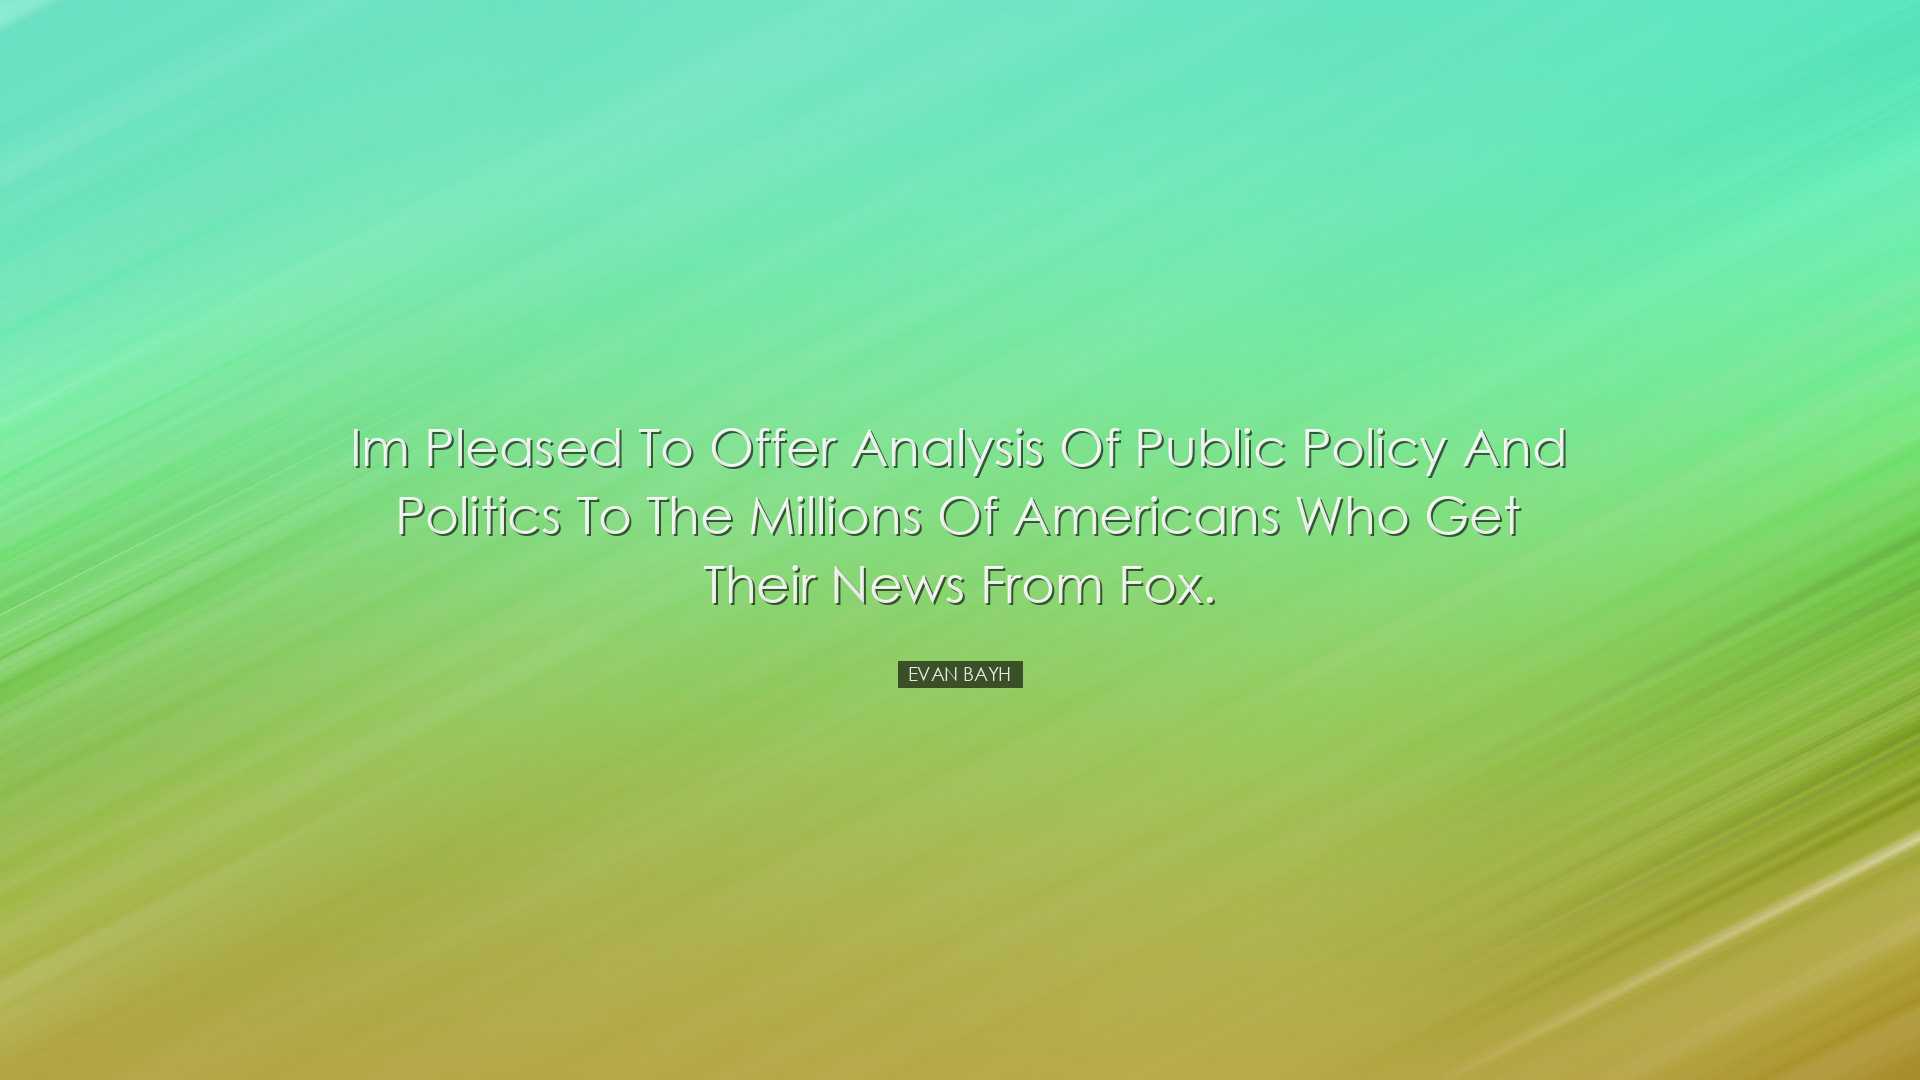 Im pleased to offer analysis of public policy and politics to the